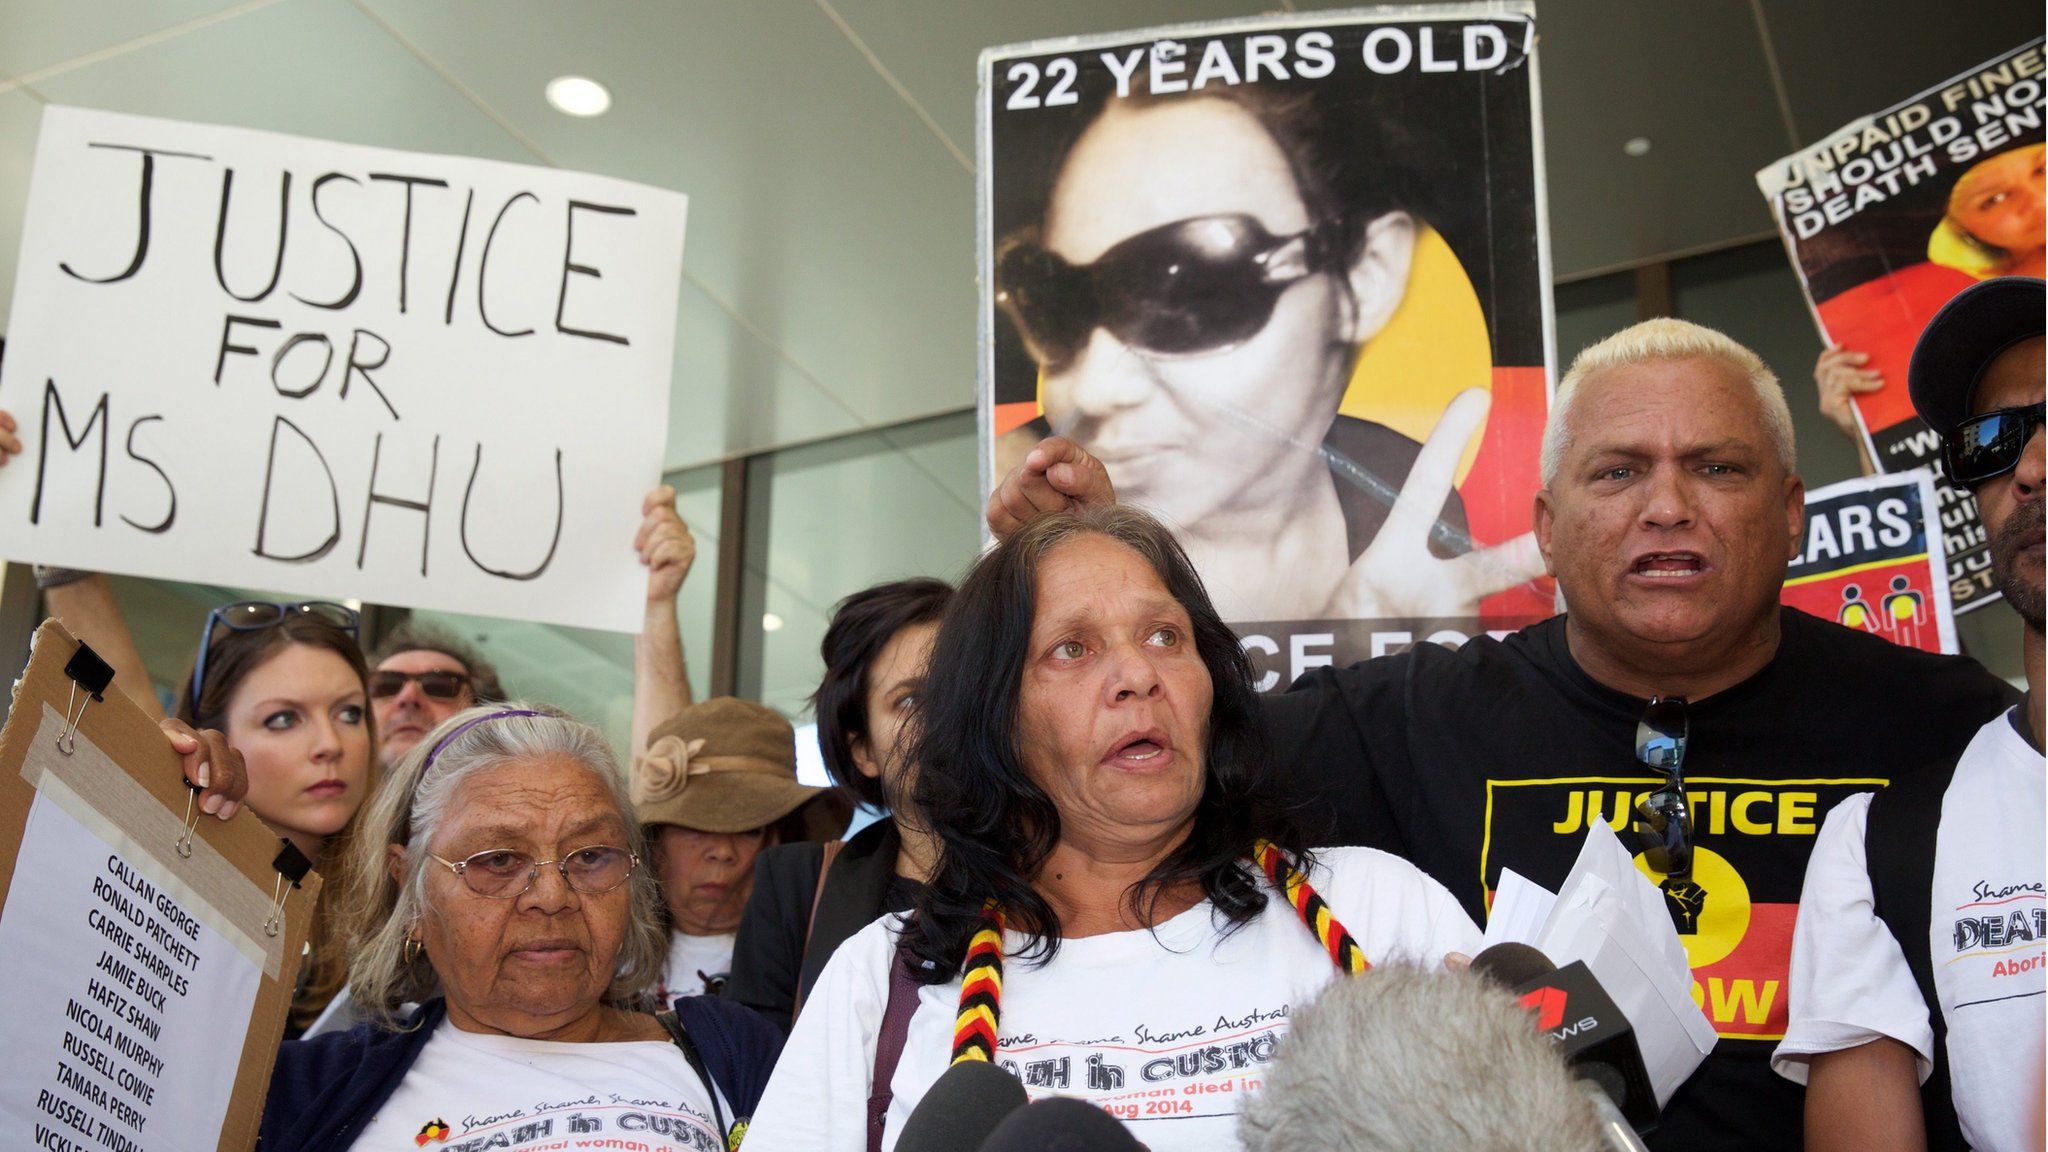 Relatives of Ms Dhu participate in a protest outside the coroner's court in Perth, Australia, 16 December 2016